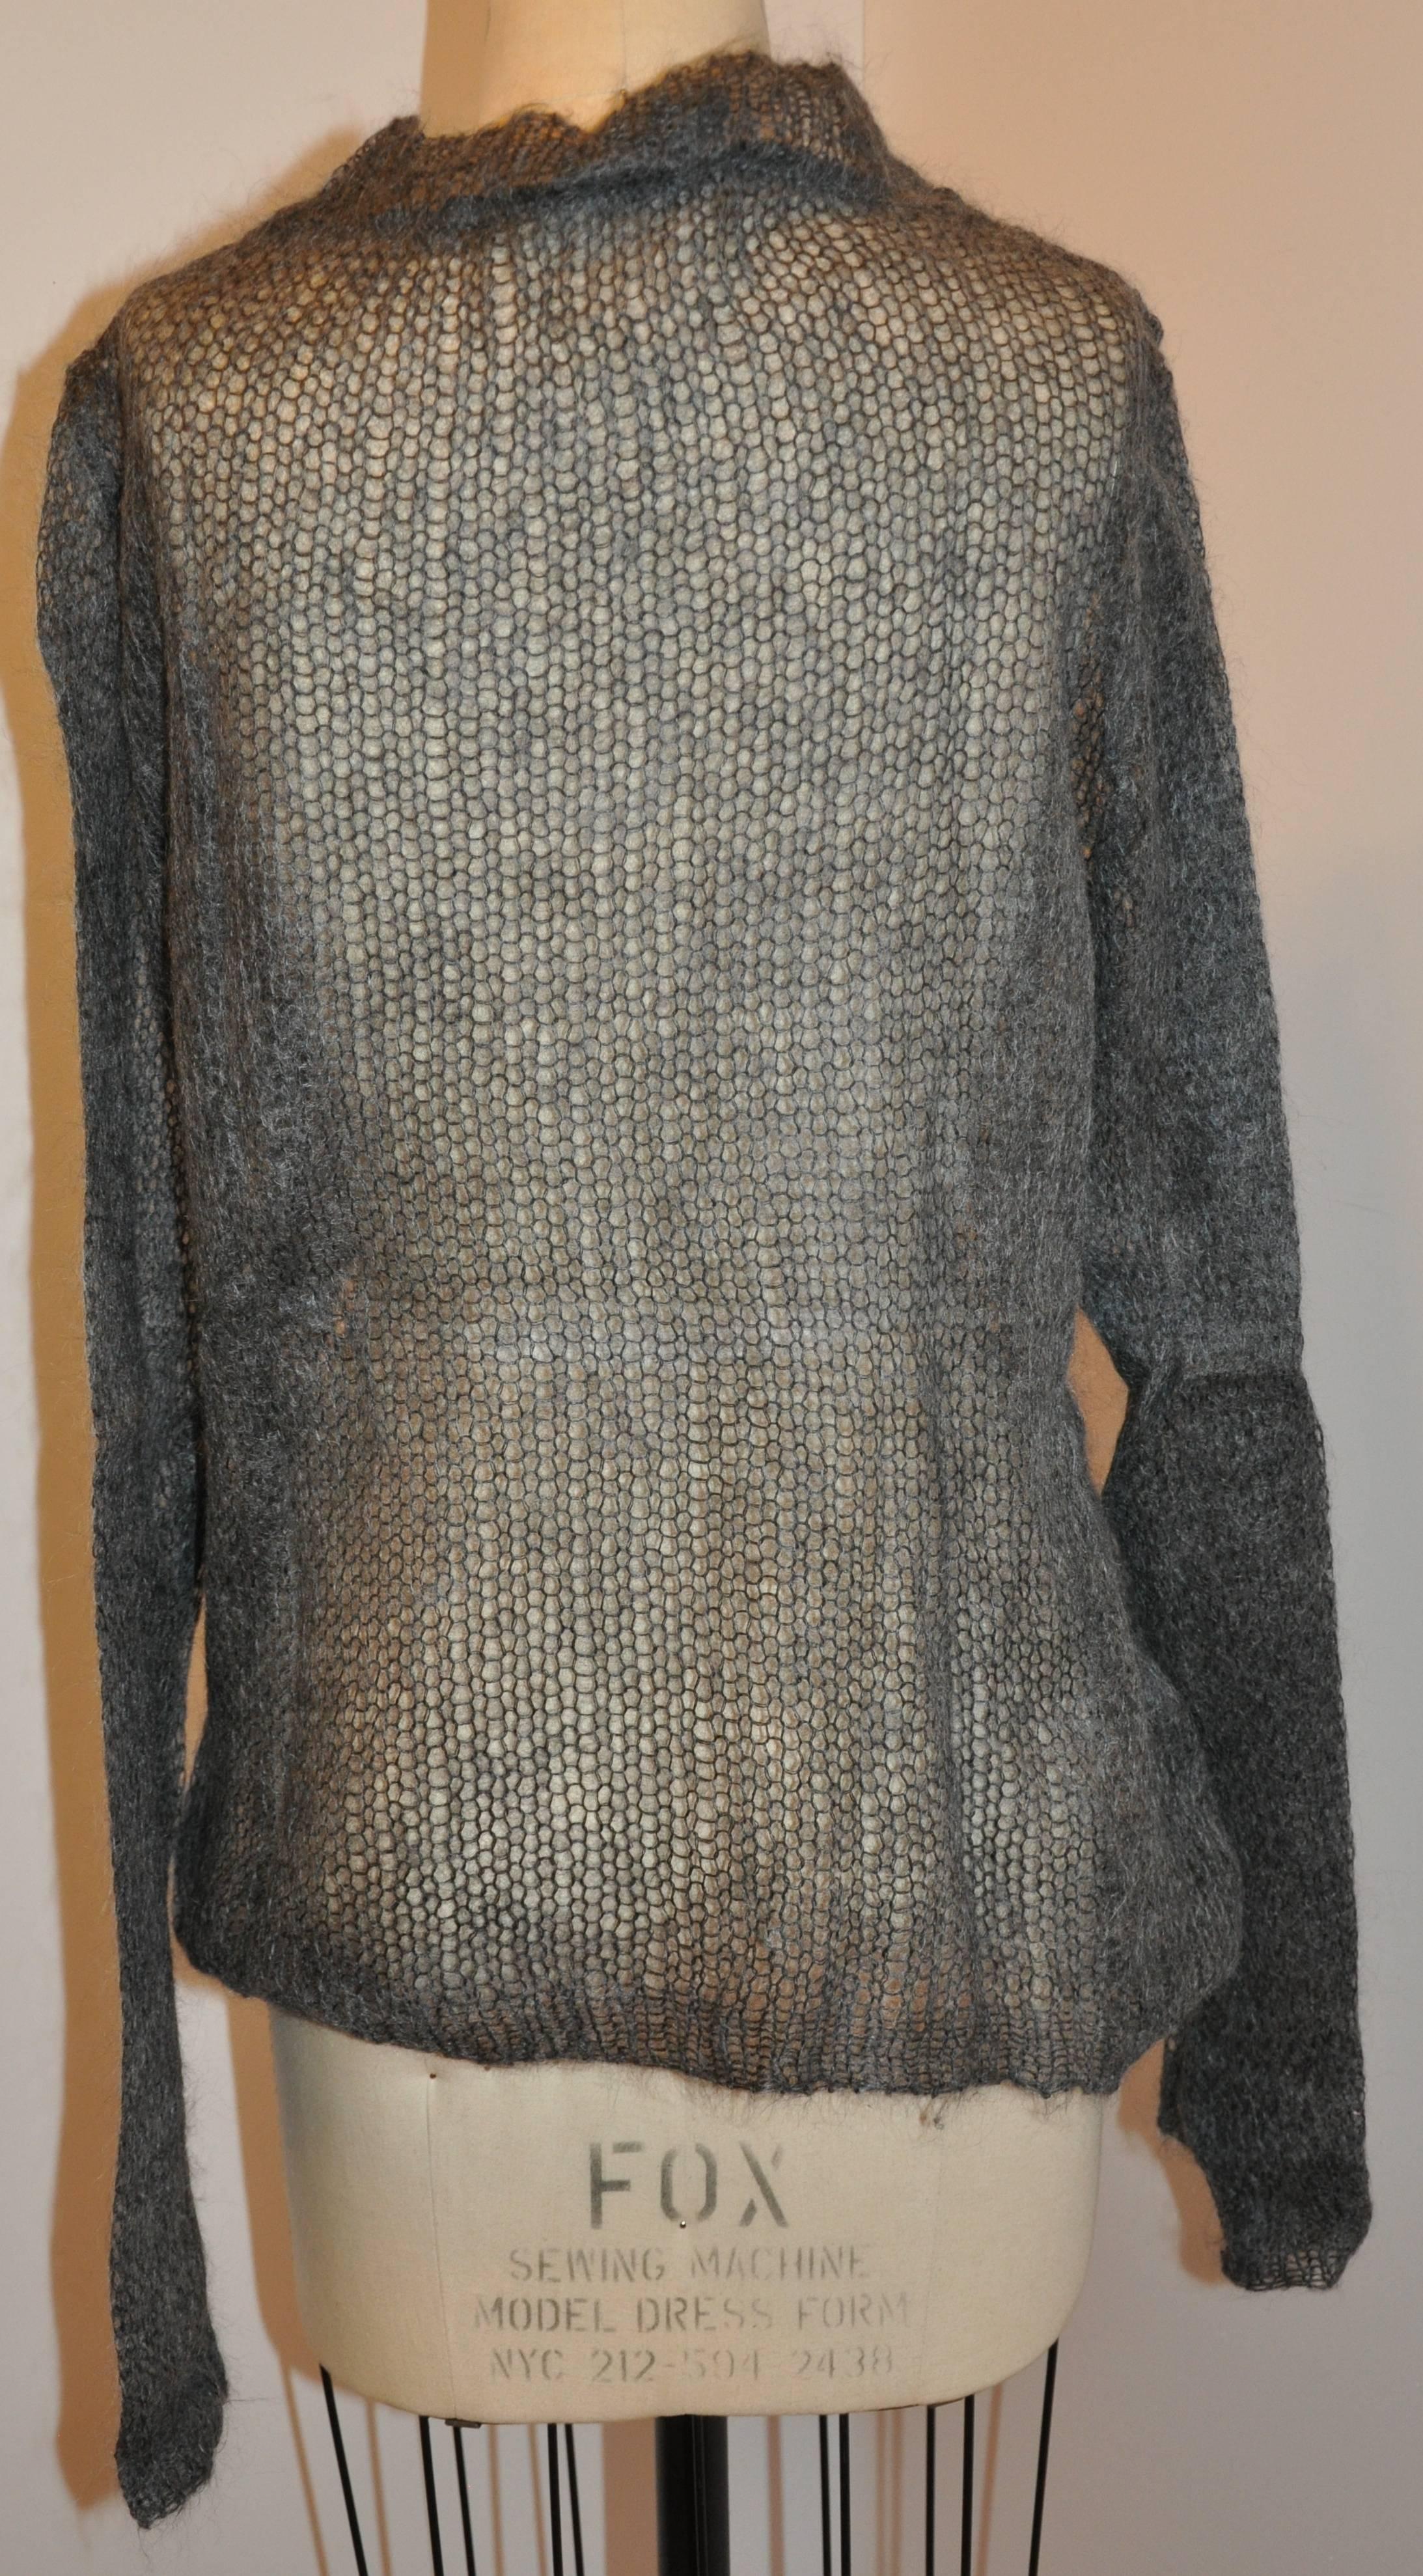        As only Ann Demeulemeester can, this loose-knit charcoal gray crew-neck pullover is made from a blend of 67% wool mohair, 30% nylon and 3% wool giving it a soft-feeling touch. The total length measures 27